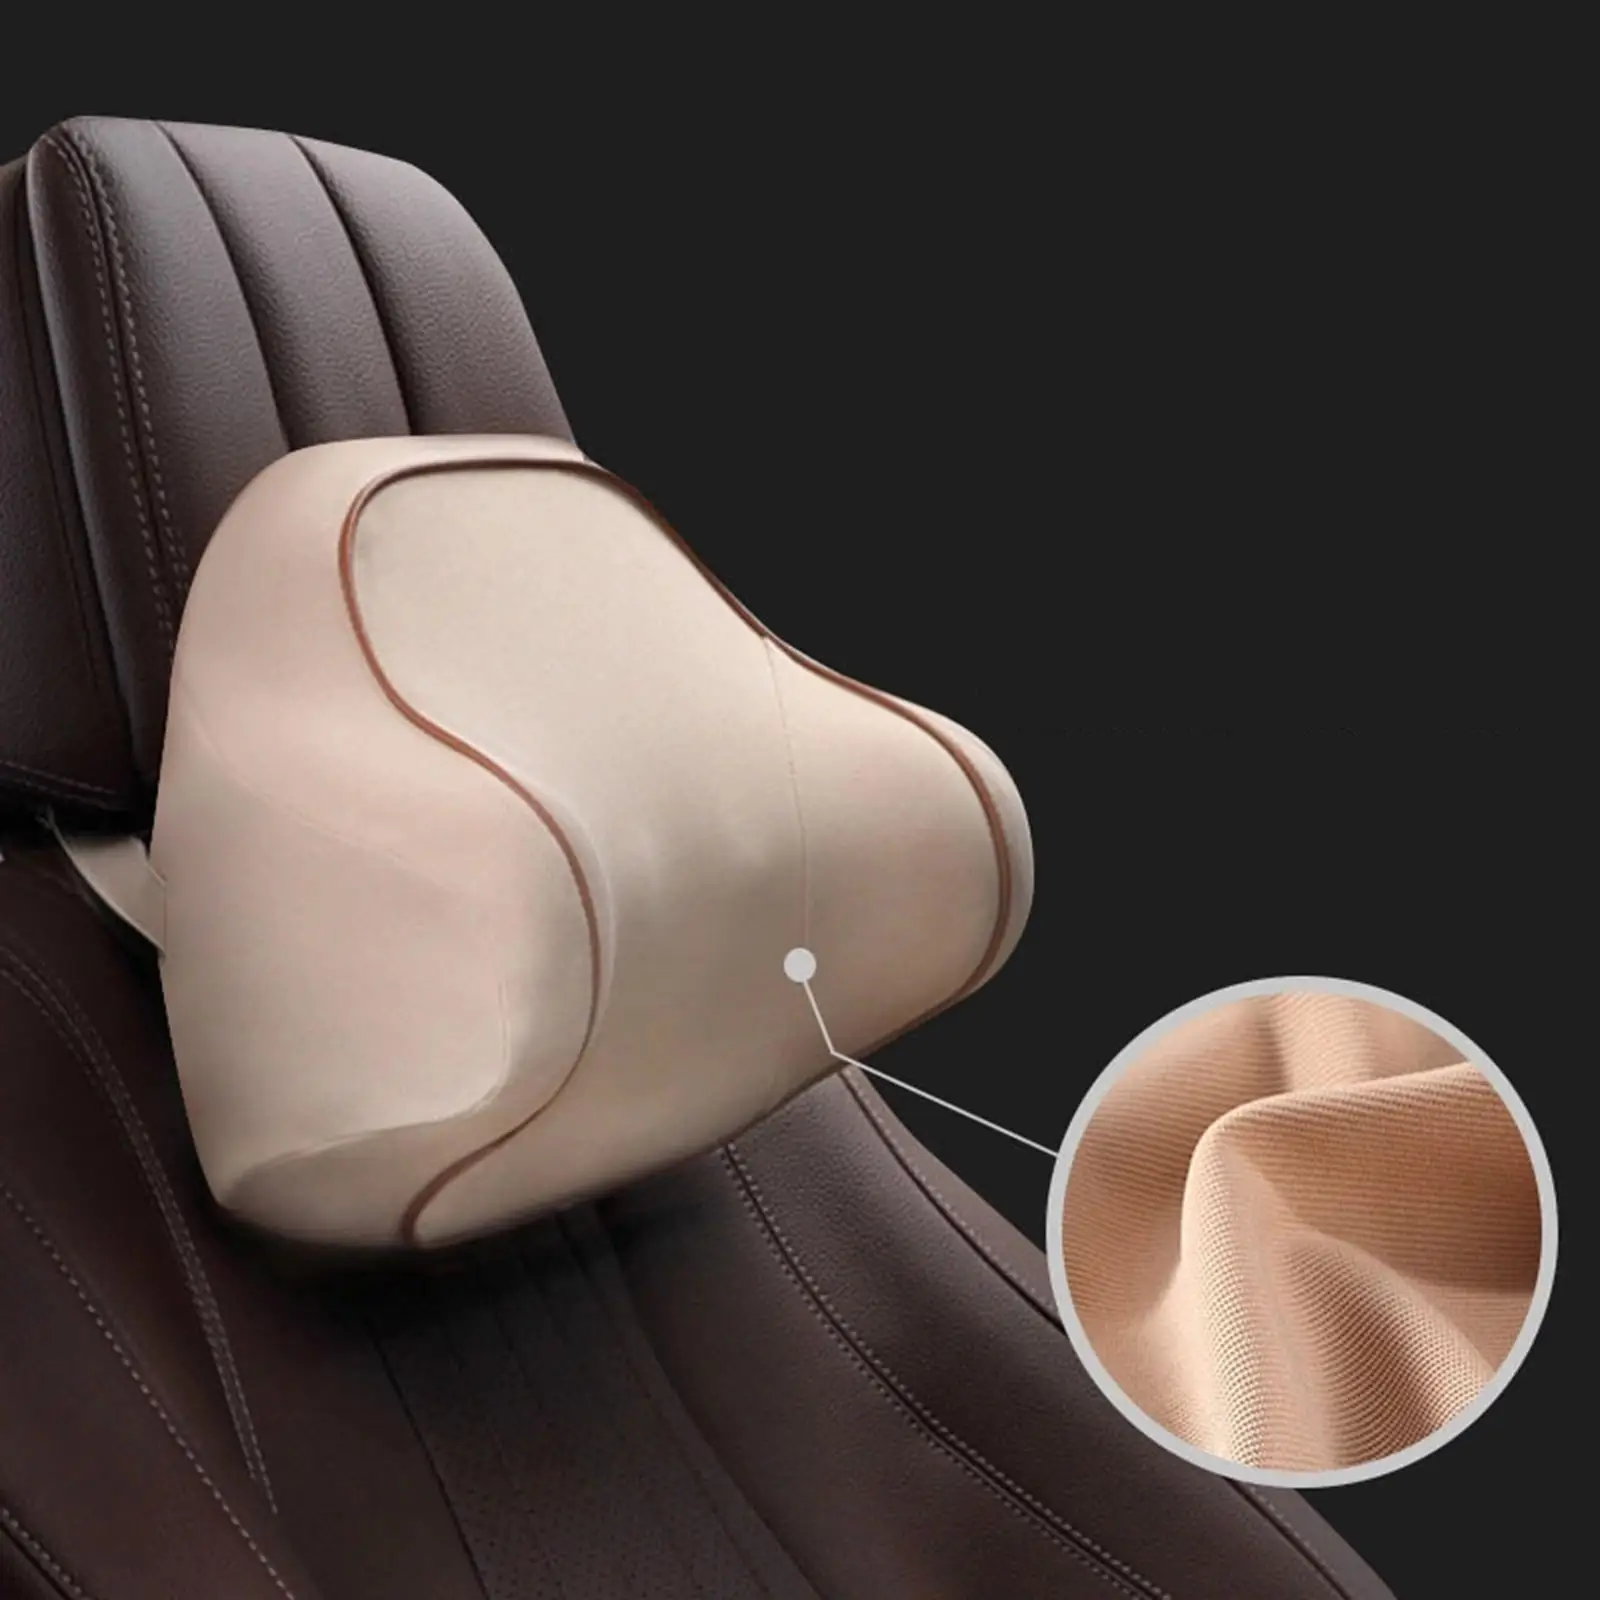 Auto Car Seat Pillow Head Support Neck Rest Memory Foam Relieve Muscle Tension High Density Space Adjustable Elastic Band